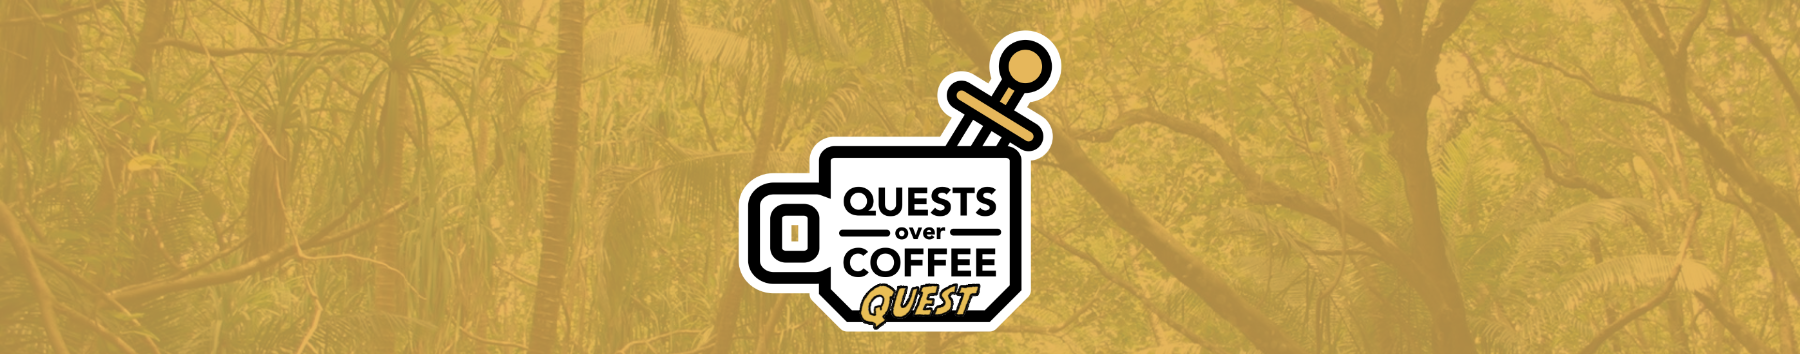 Quests Over Coffee Quest